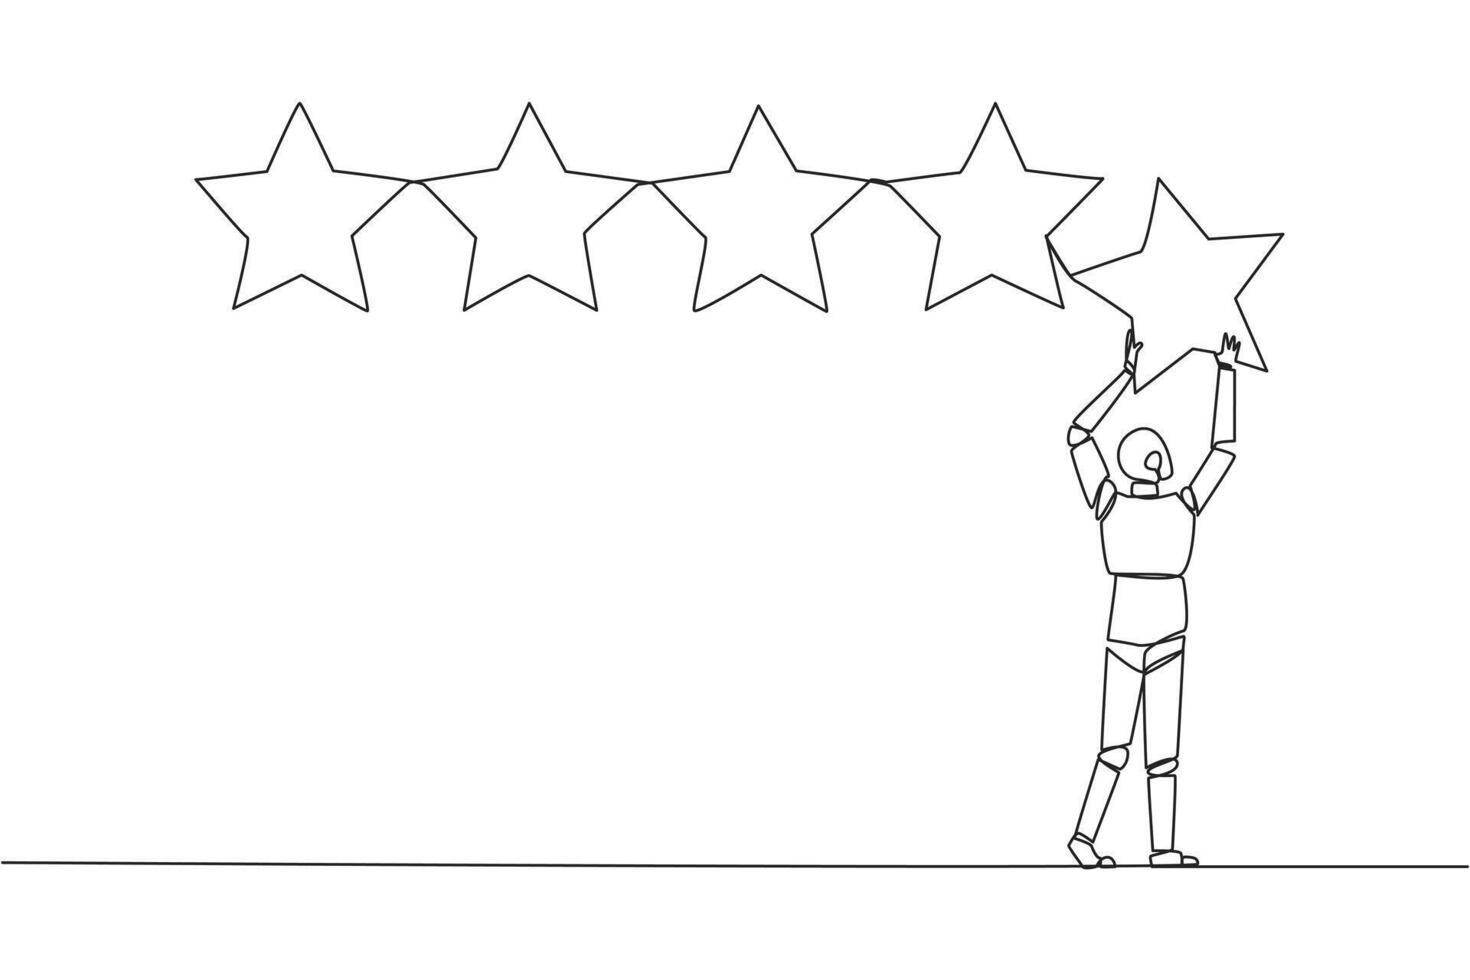 Single continuous line drawing robot holding up a star with both hands and pasting it up to make 5 stars in a row. Give the best review. Online shop. Future tech. One line design vector illustration